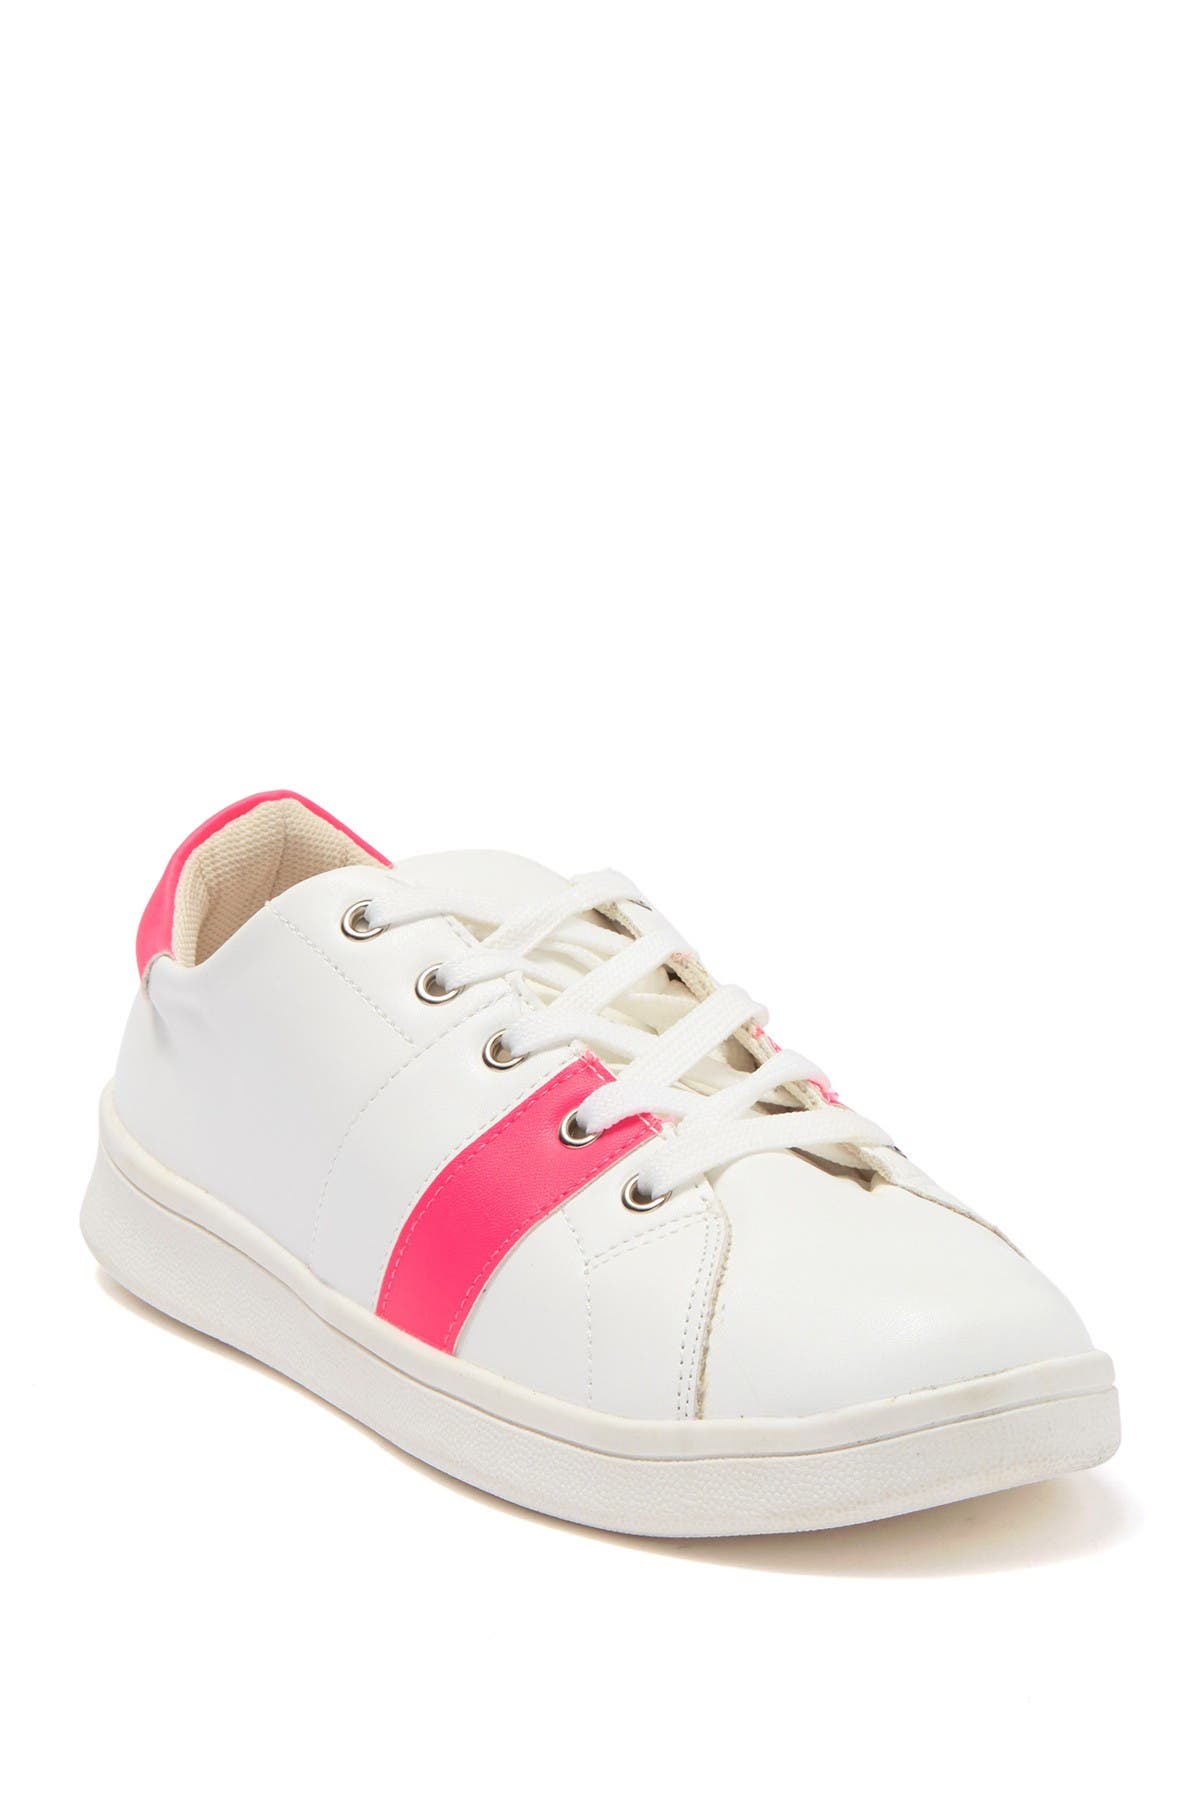 chase and chloe sneakers